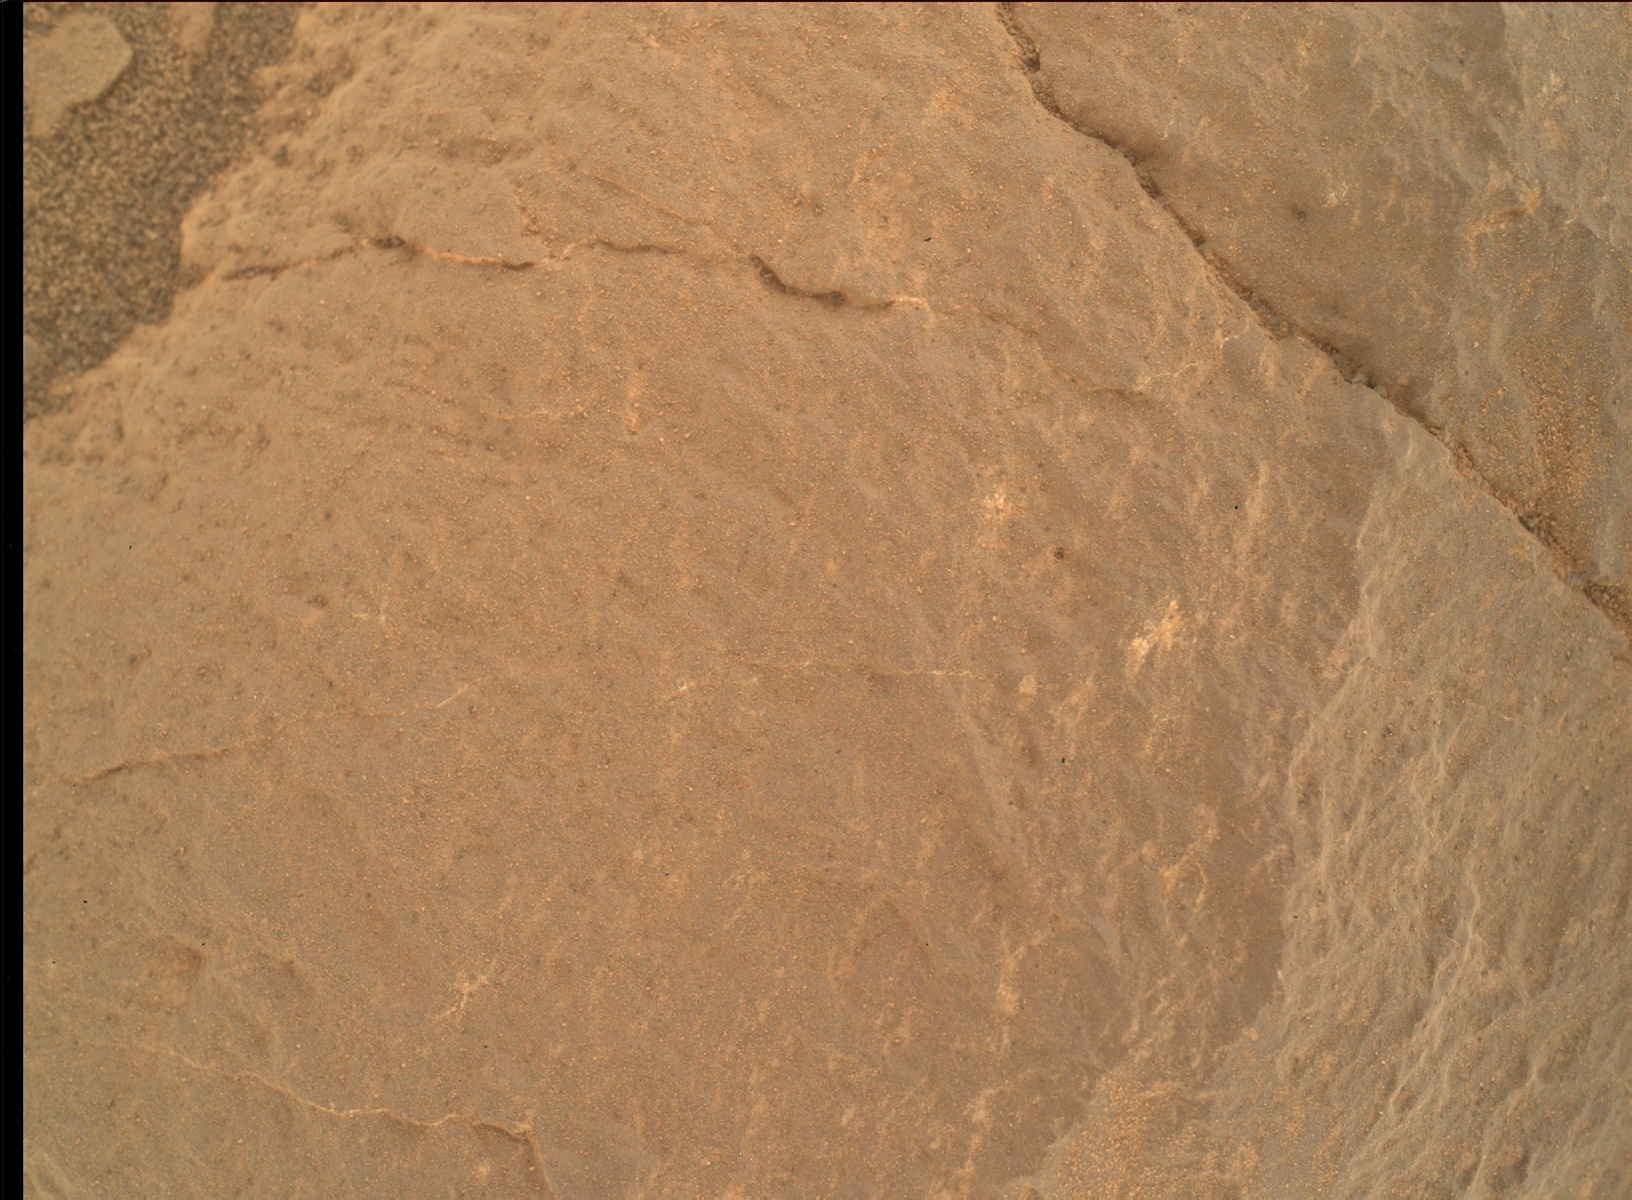 Nasa's Mars rover Curiosity acquired this image using its Mars Hand Lens Imager (MAHLI) on Sol 1889